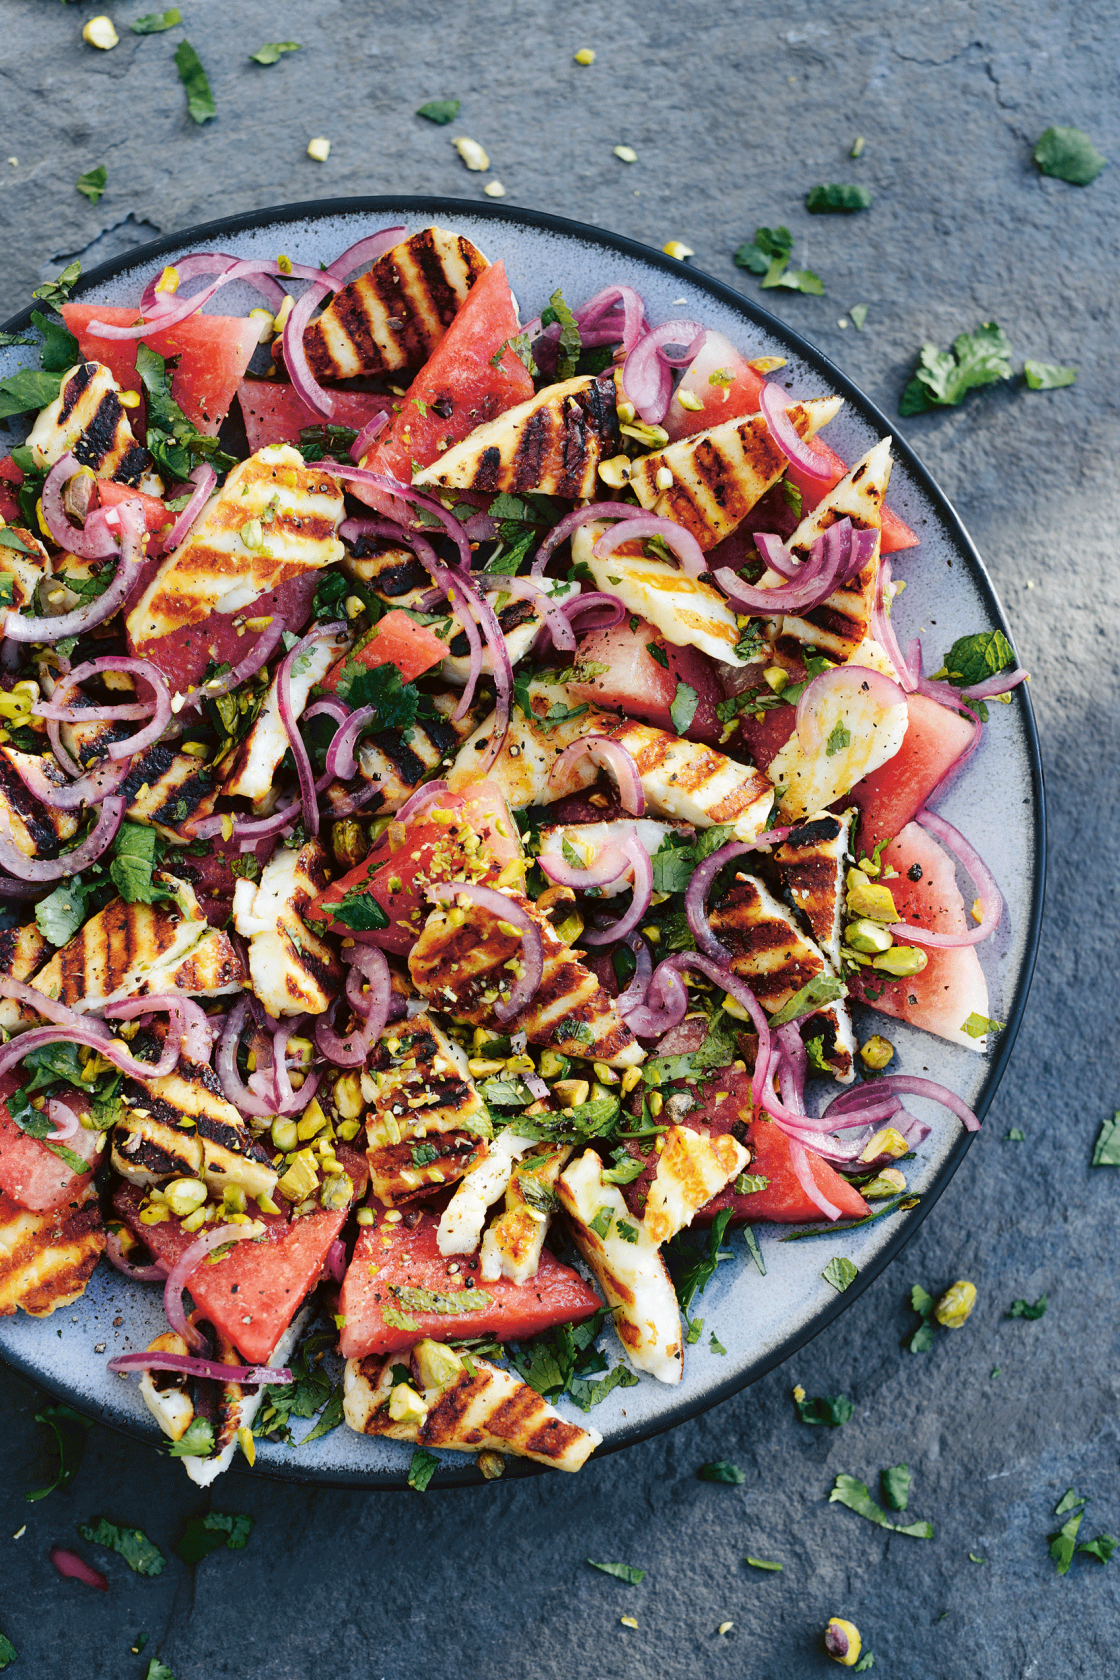 https://images-stylist.s3-eu-west-1.amazonaws.com/app/uploads/2021/07/15174837/watermelon-halloumi-lime-pickled-red-onions-1-1120x1680.png